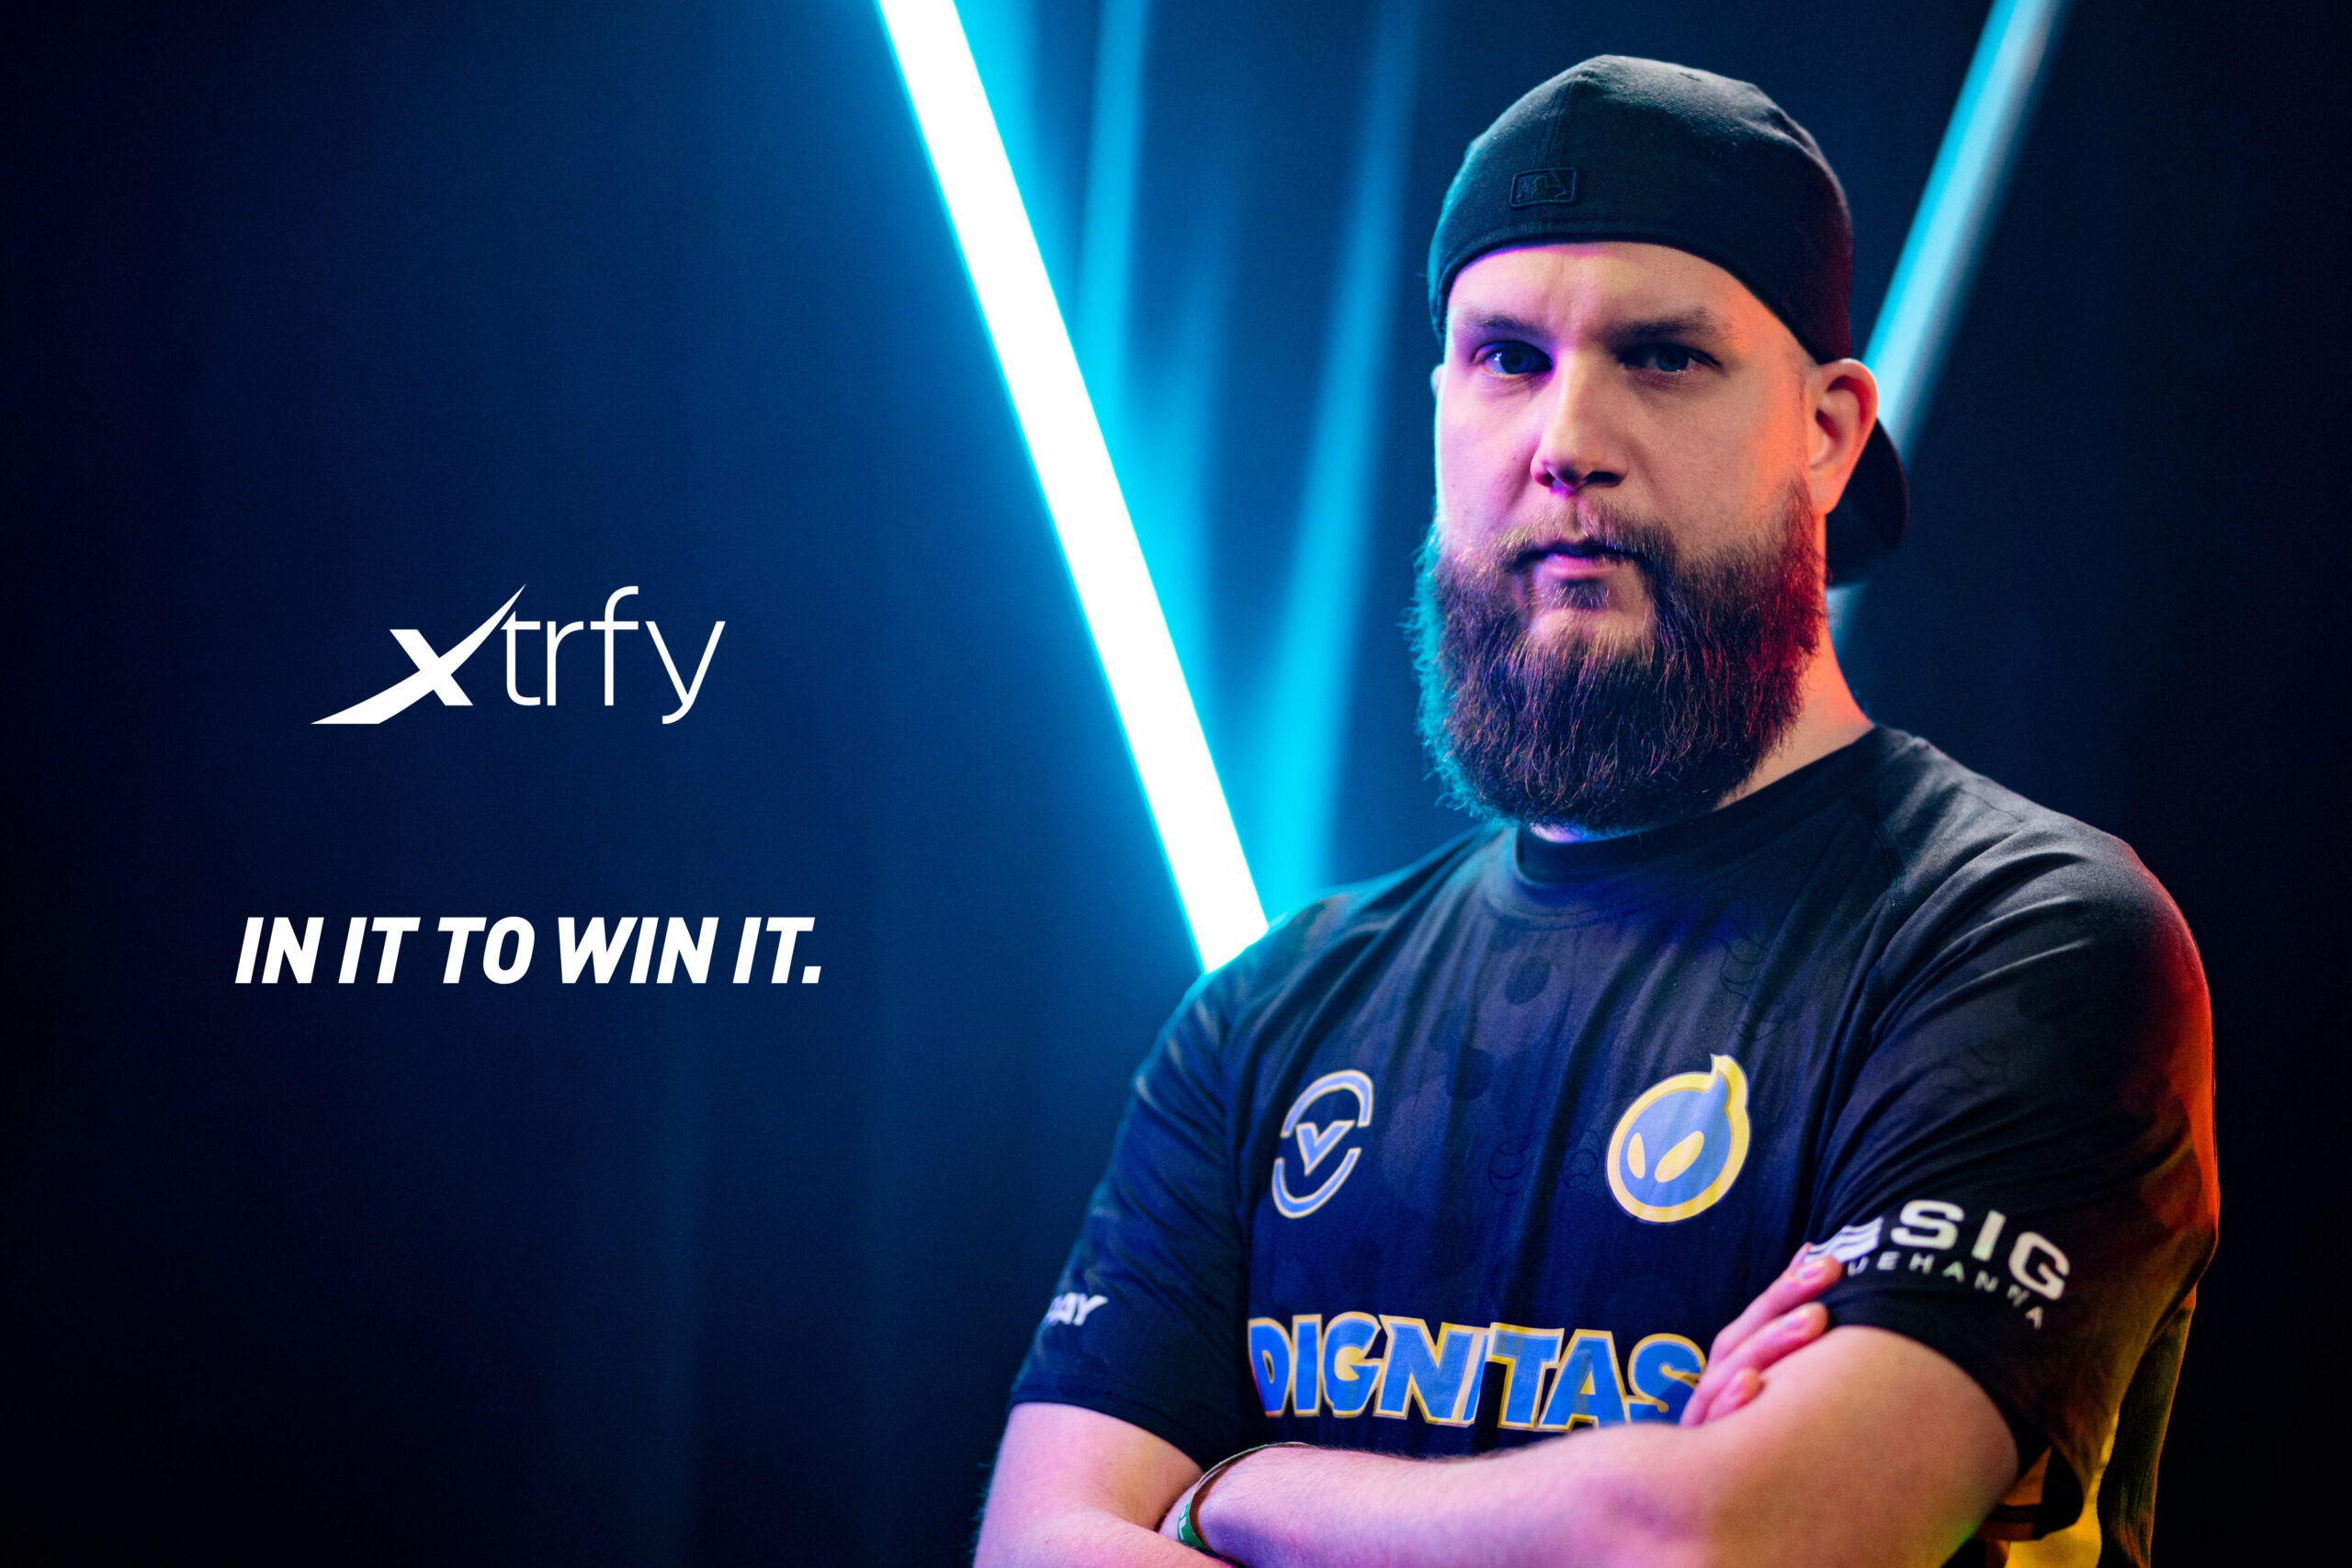 f0rest joins the Xtrfy Family